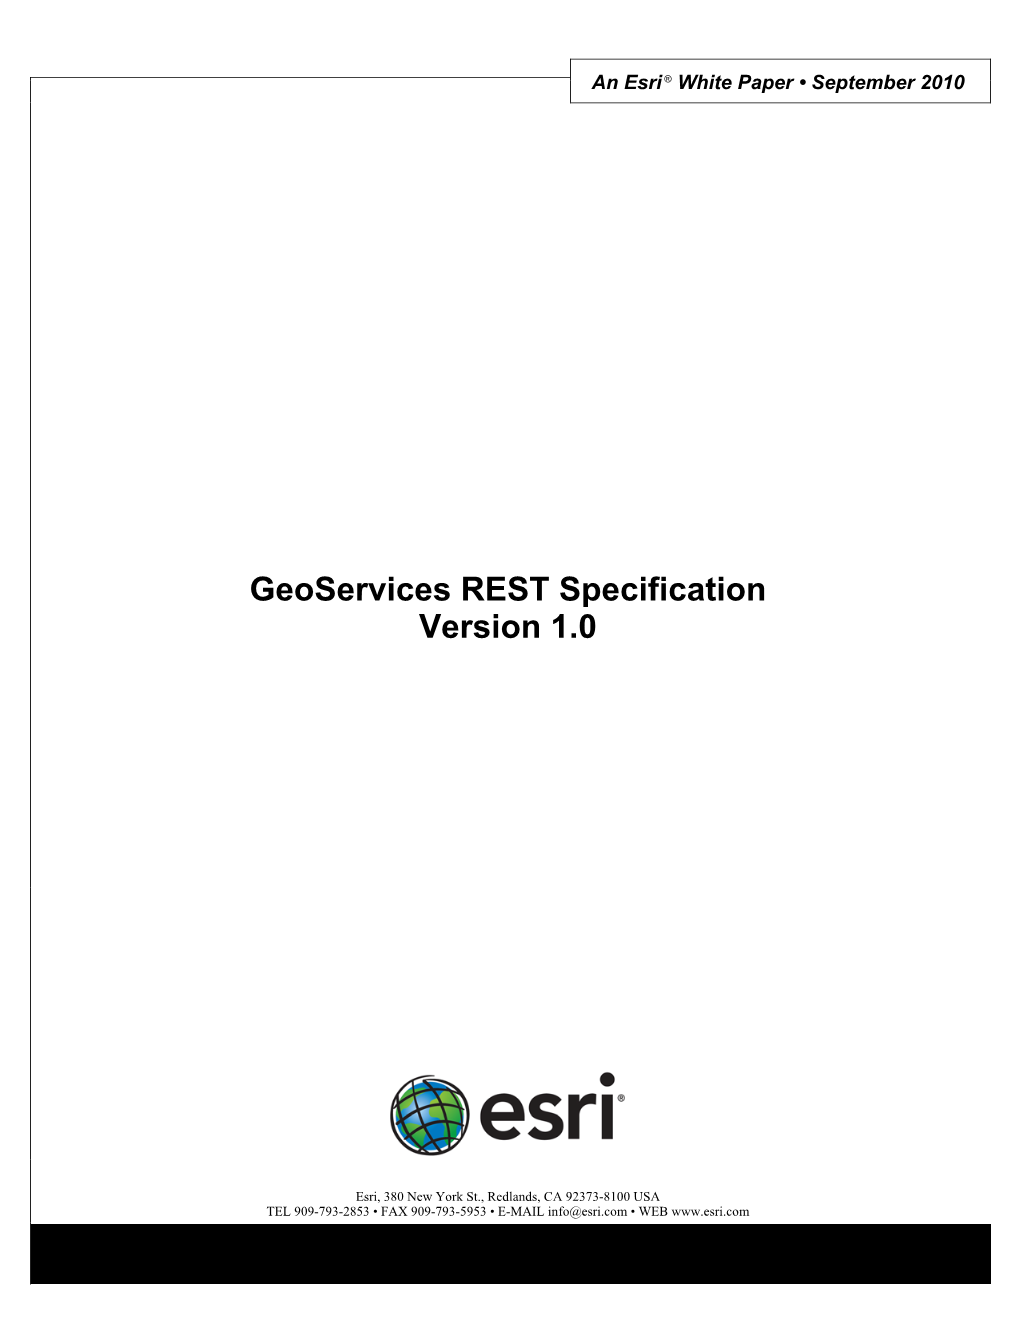 Geoservices REST Specification Version 1.0